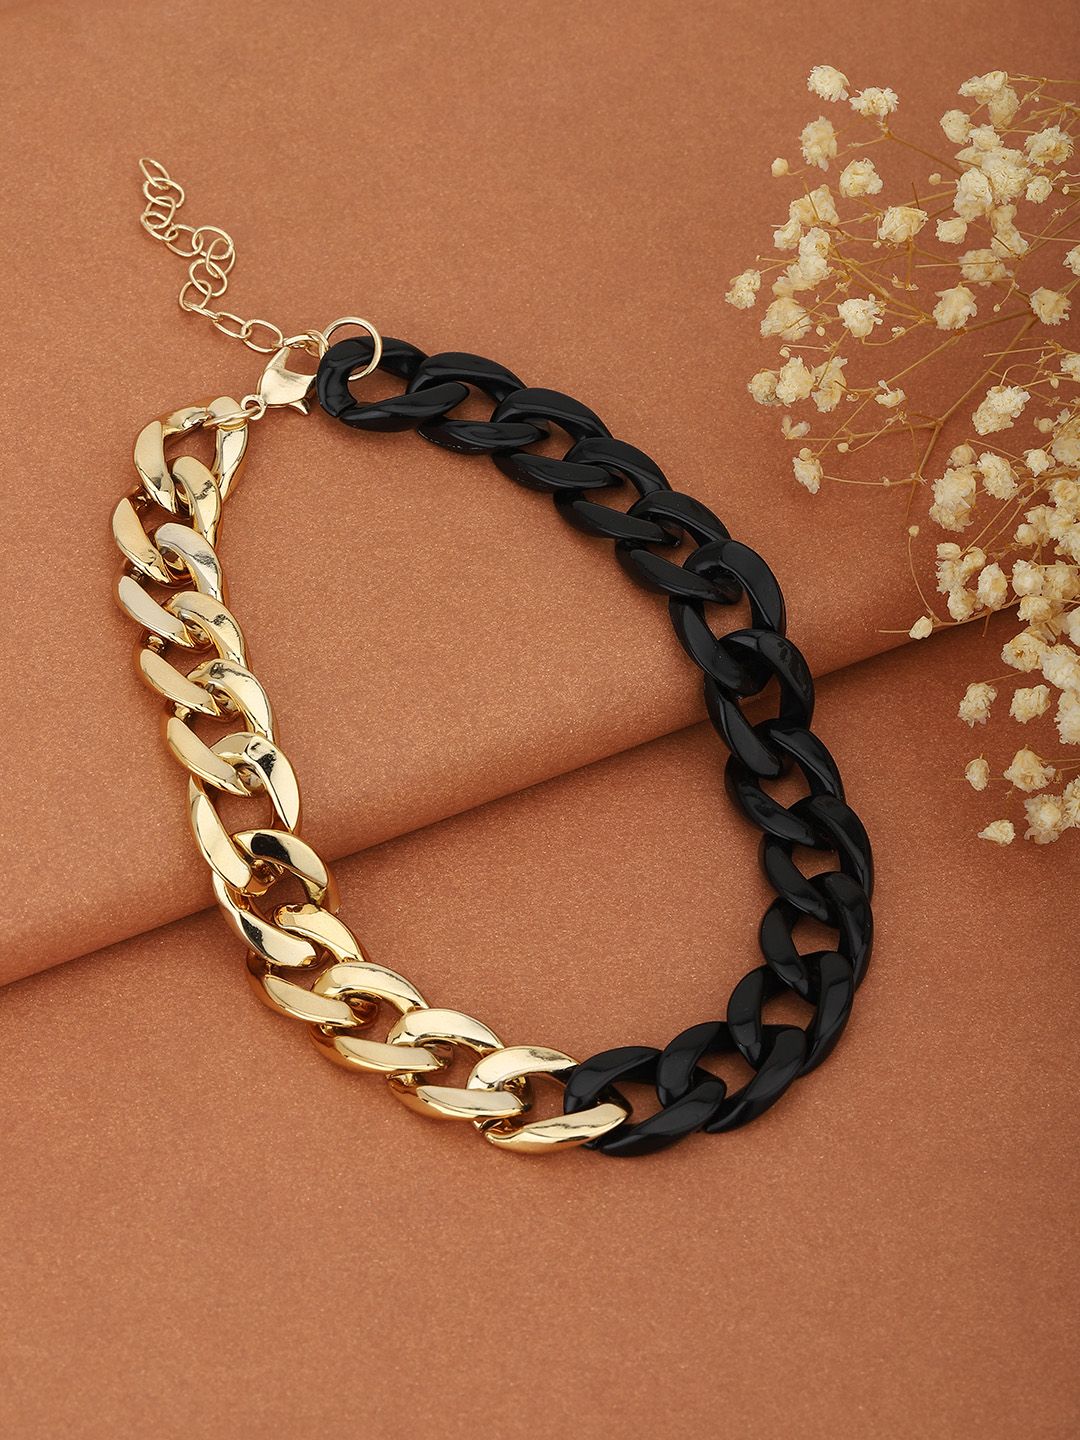 Carlton London Black Gold-Plated Handcrafted Necklace Price in India